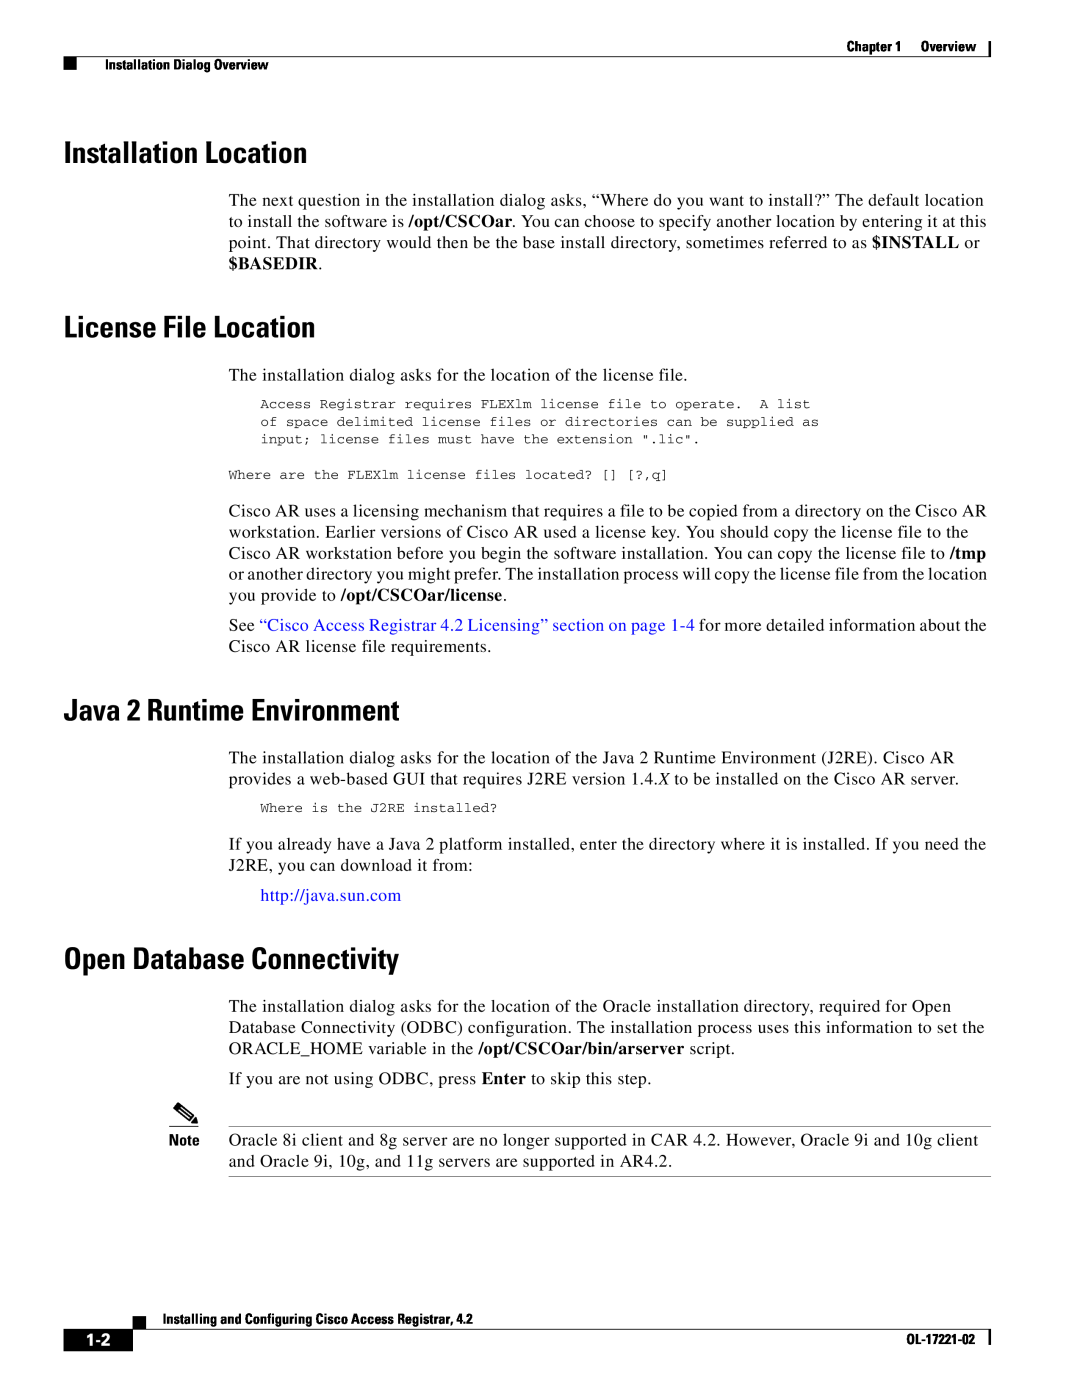 Cisco Systems 4.2 Installation Location, License File Location, Java 2 Runtime Environment, Open Database Connectivity 